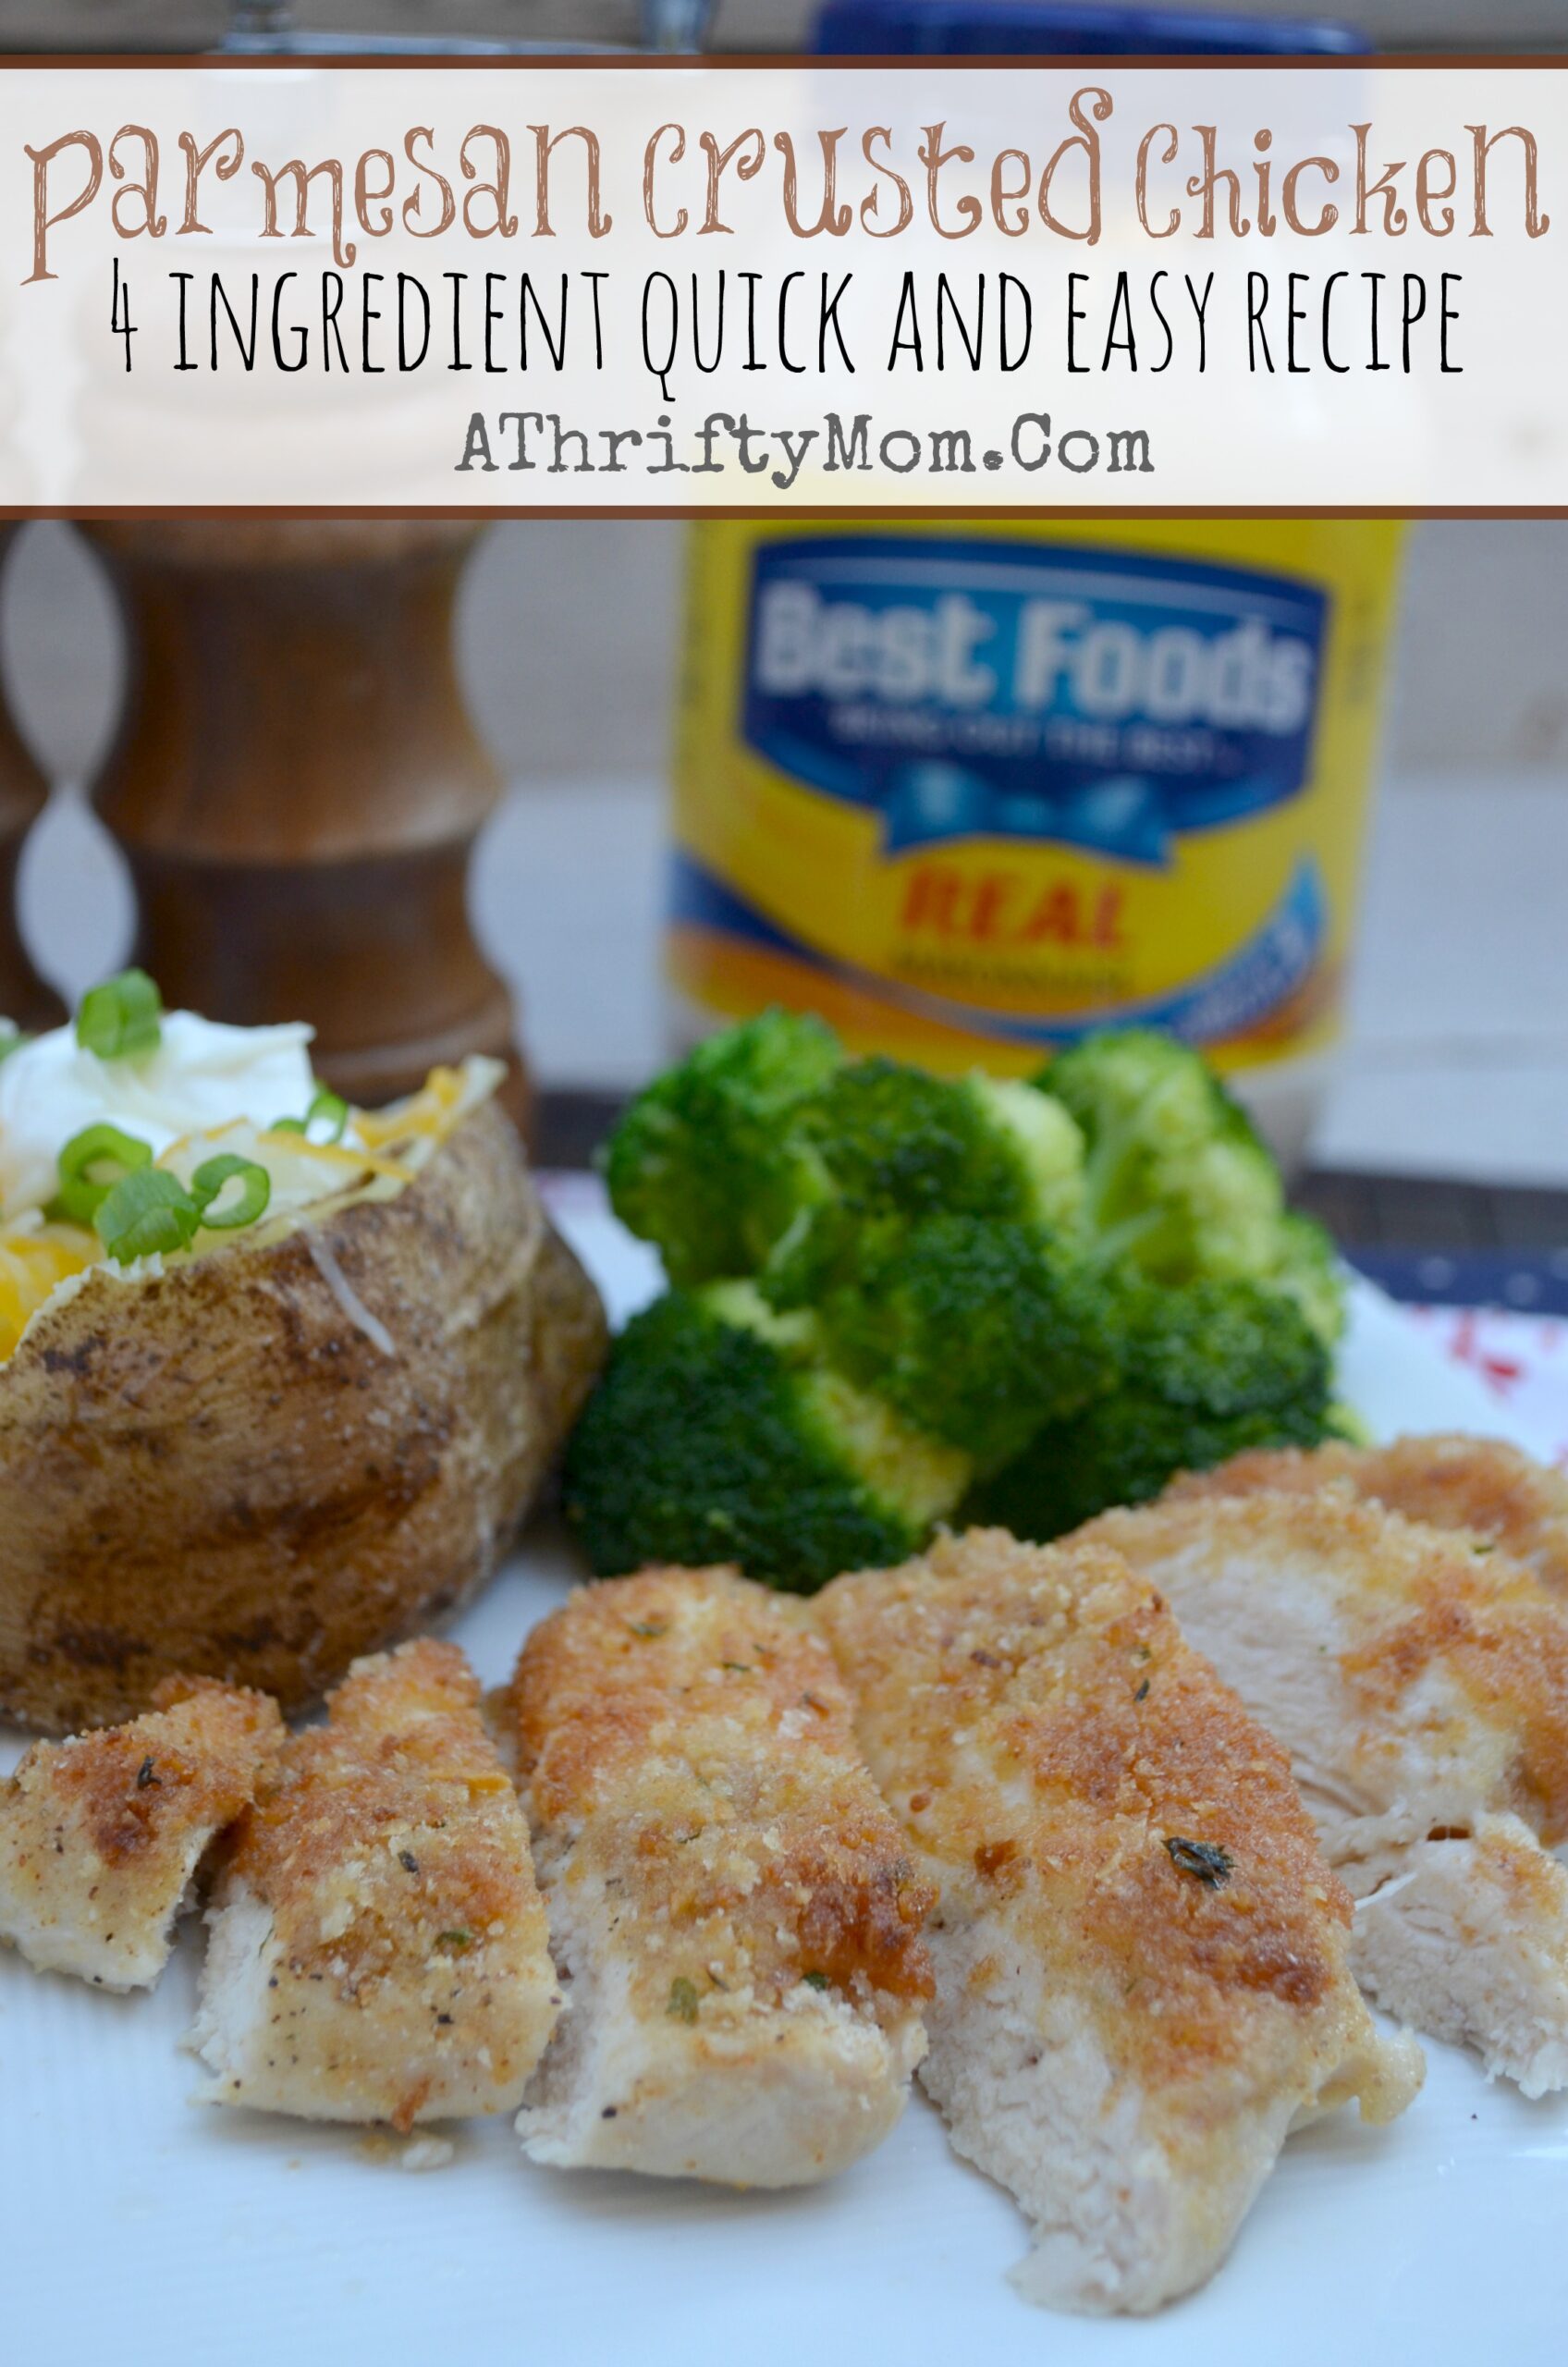 https://athriftymom.com/wp-content/uploads//2014/12/Parmesan-crusted-chicken-recipe-this-fast-and-easy-recipe-only-has-4-ingedients-and-it-is-AMAZING.-You-would-never-know-it-has-Best-Foods-mayo-in-it-Chicken-Recipe-scaled.jpg